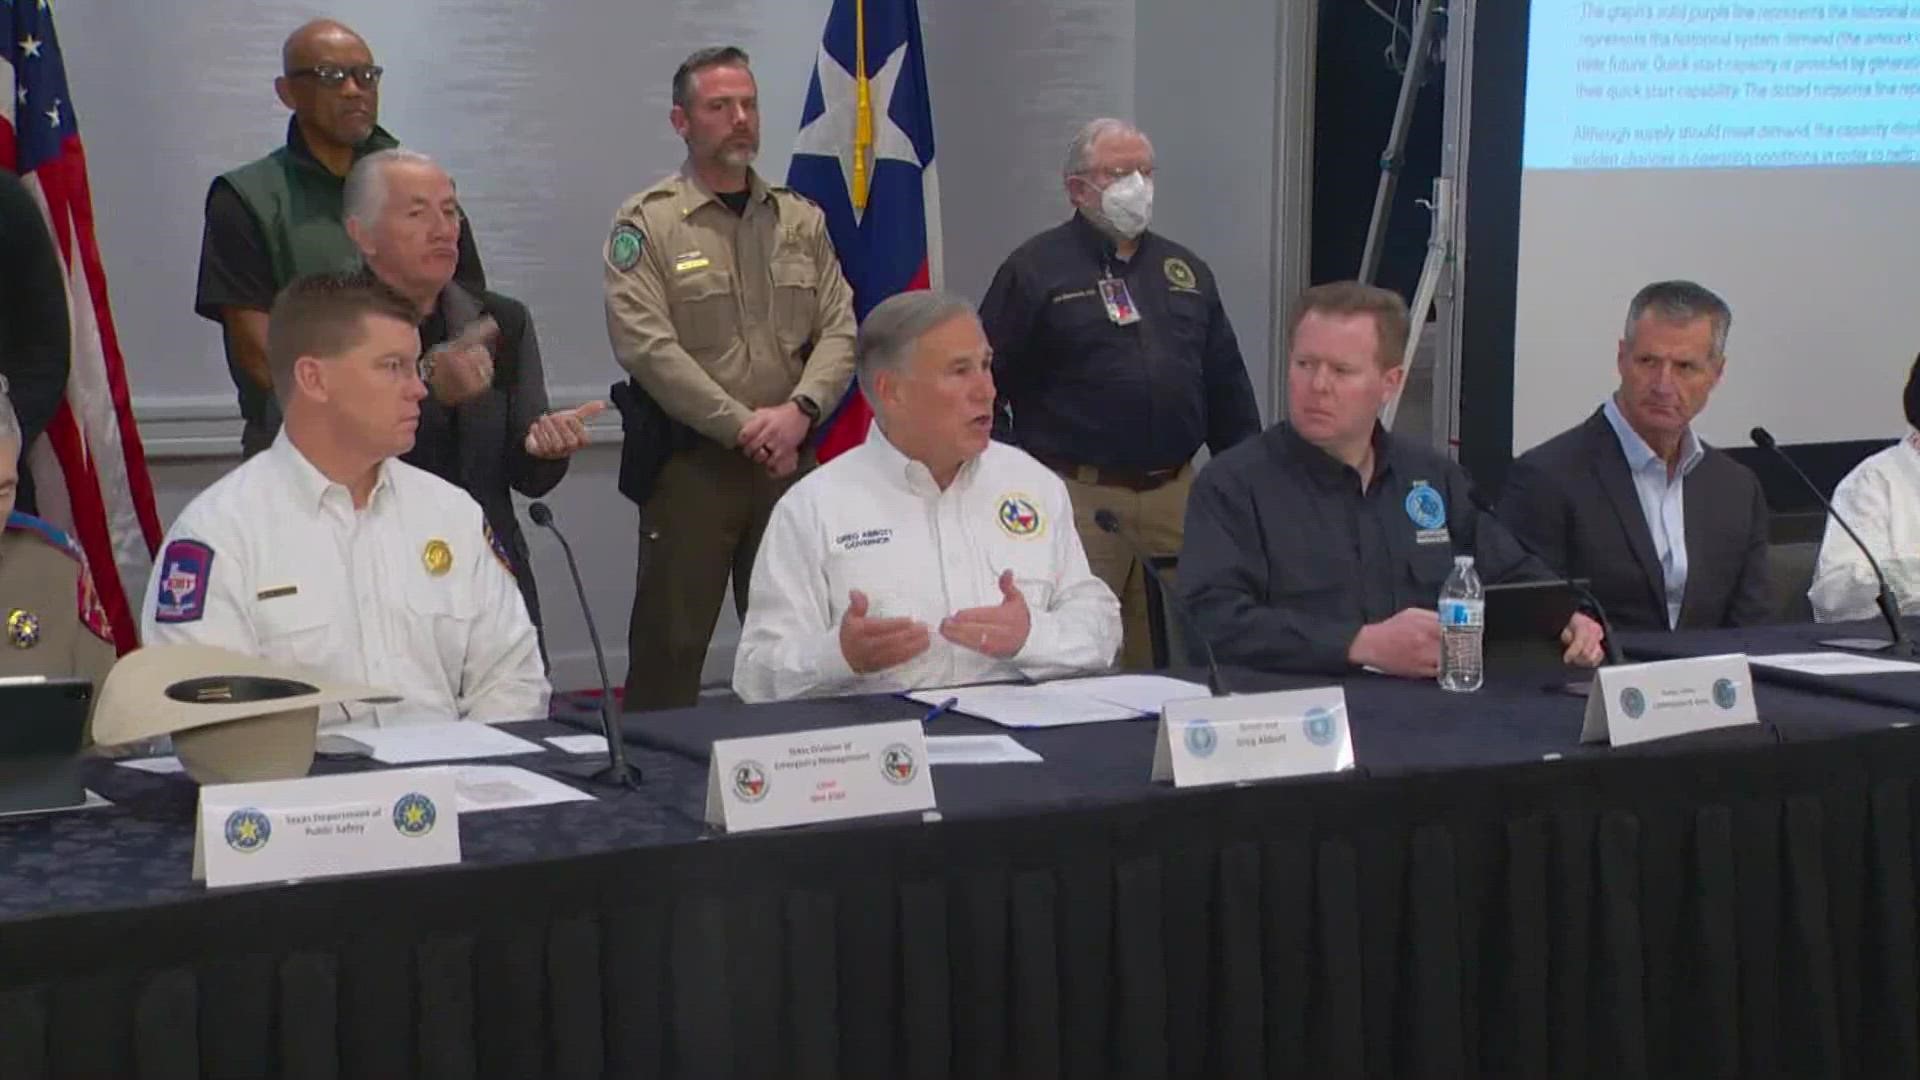 Abbott said the state is fully ready to respond to the winter storm that he referred to as one of the most 'significant' icing events in decades.